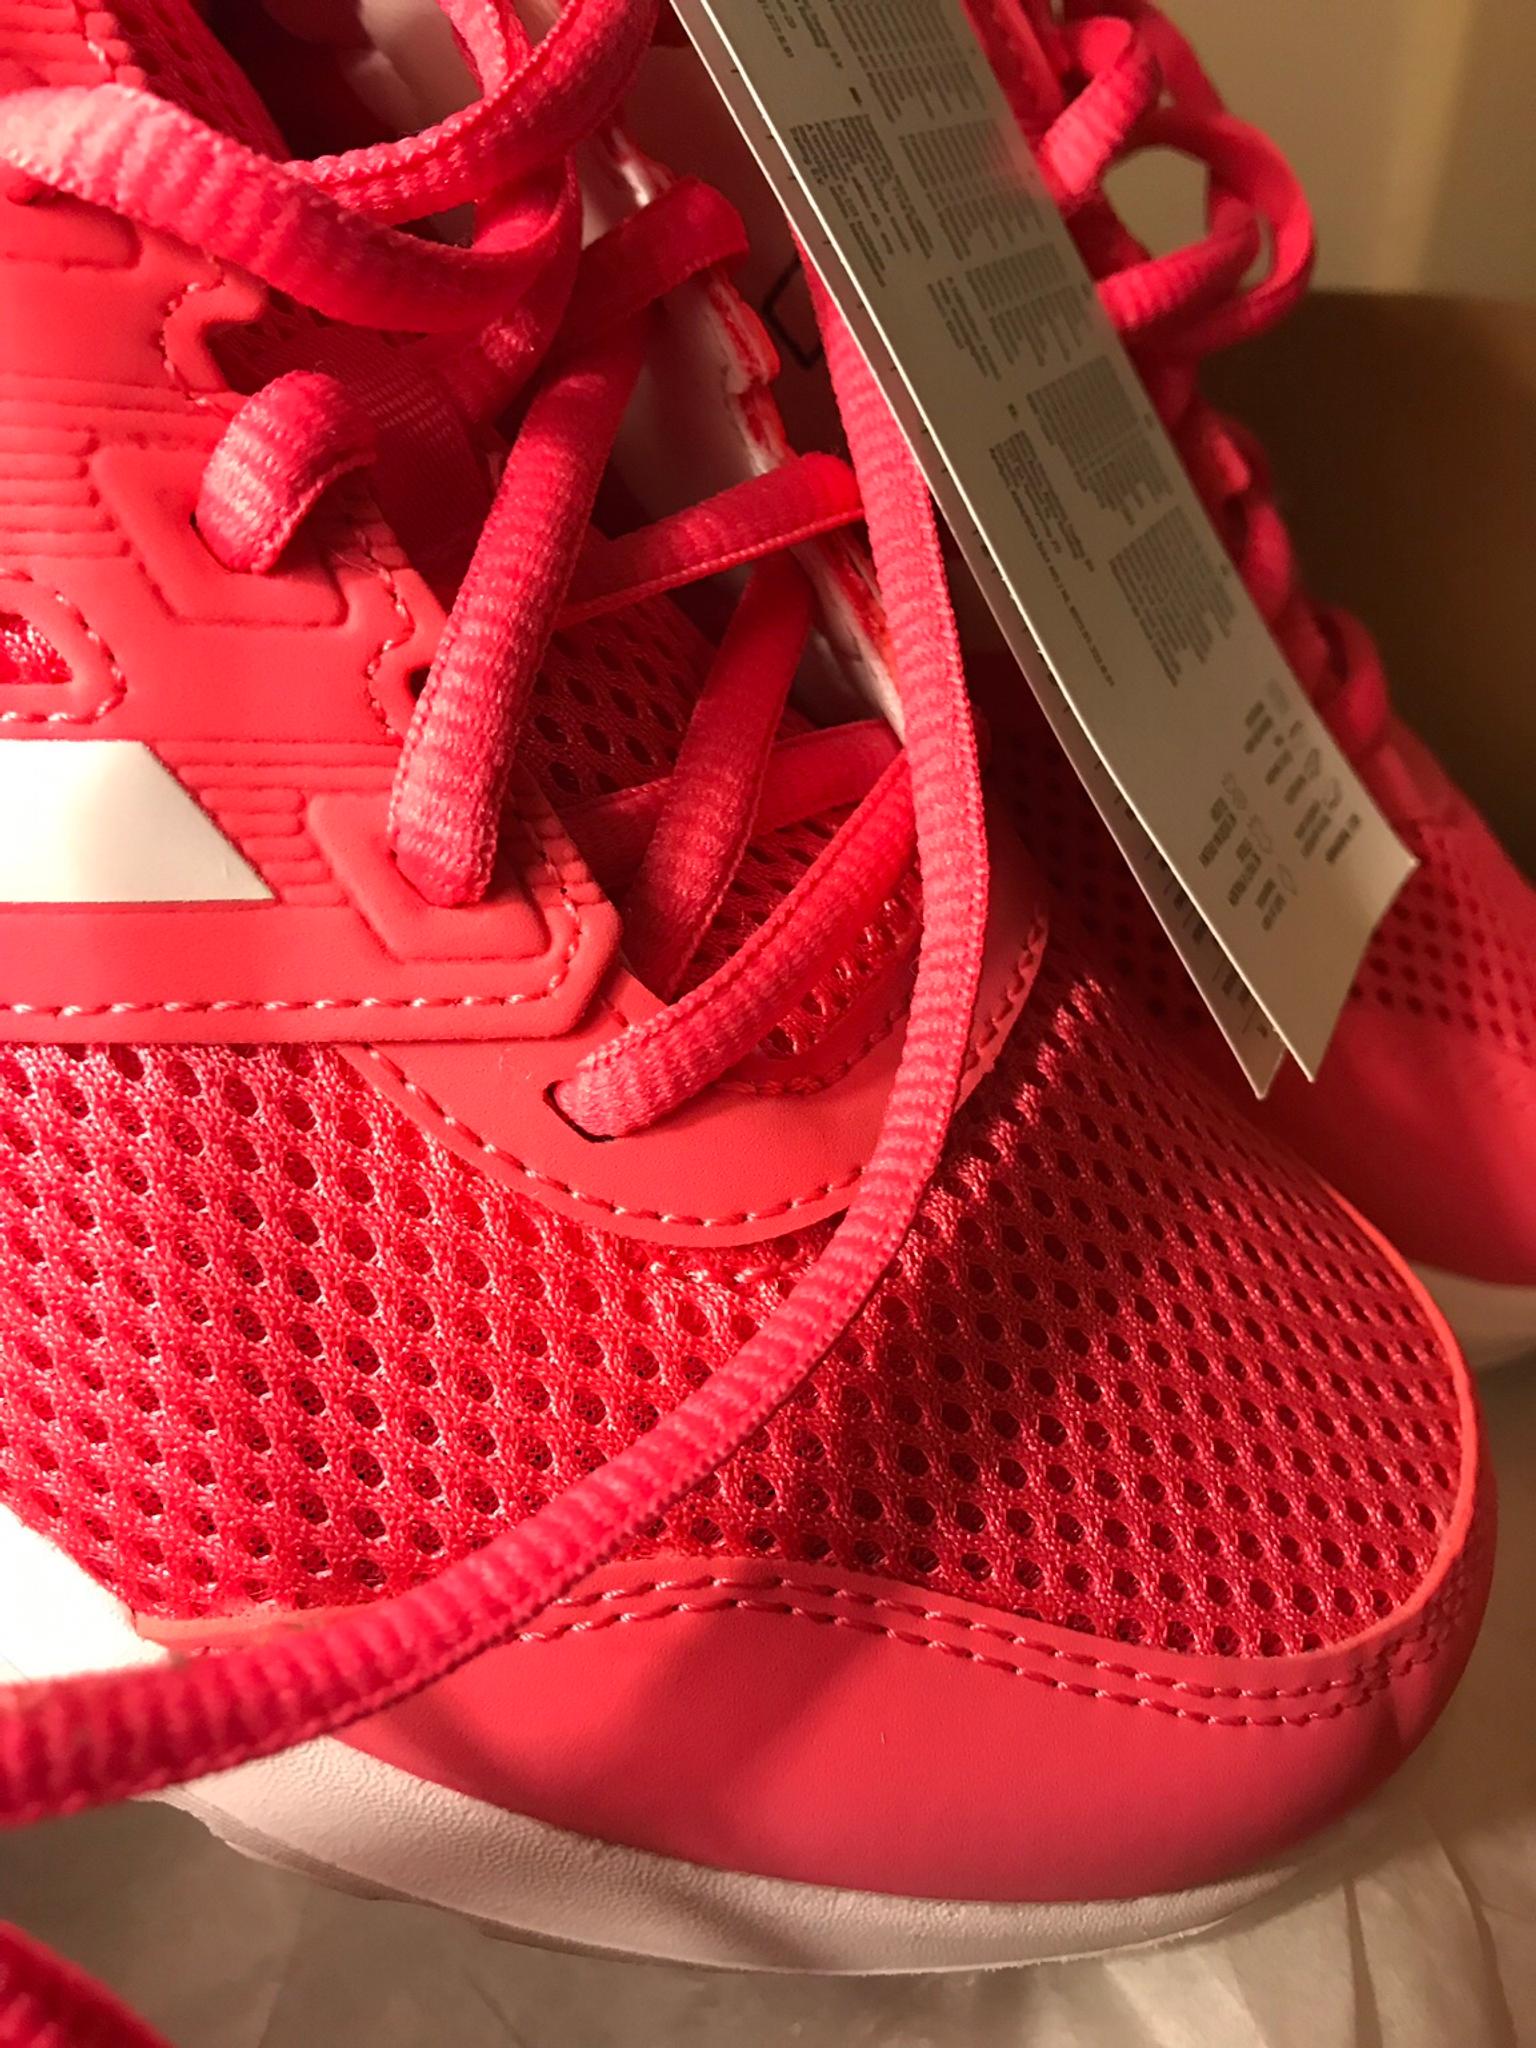 bright pink adidas trainers